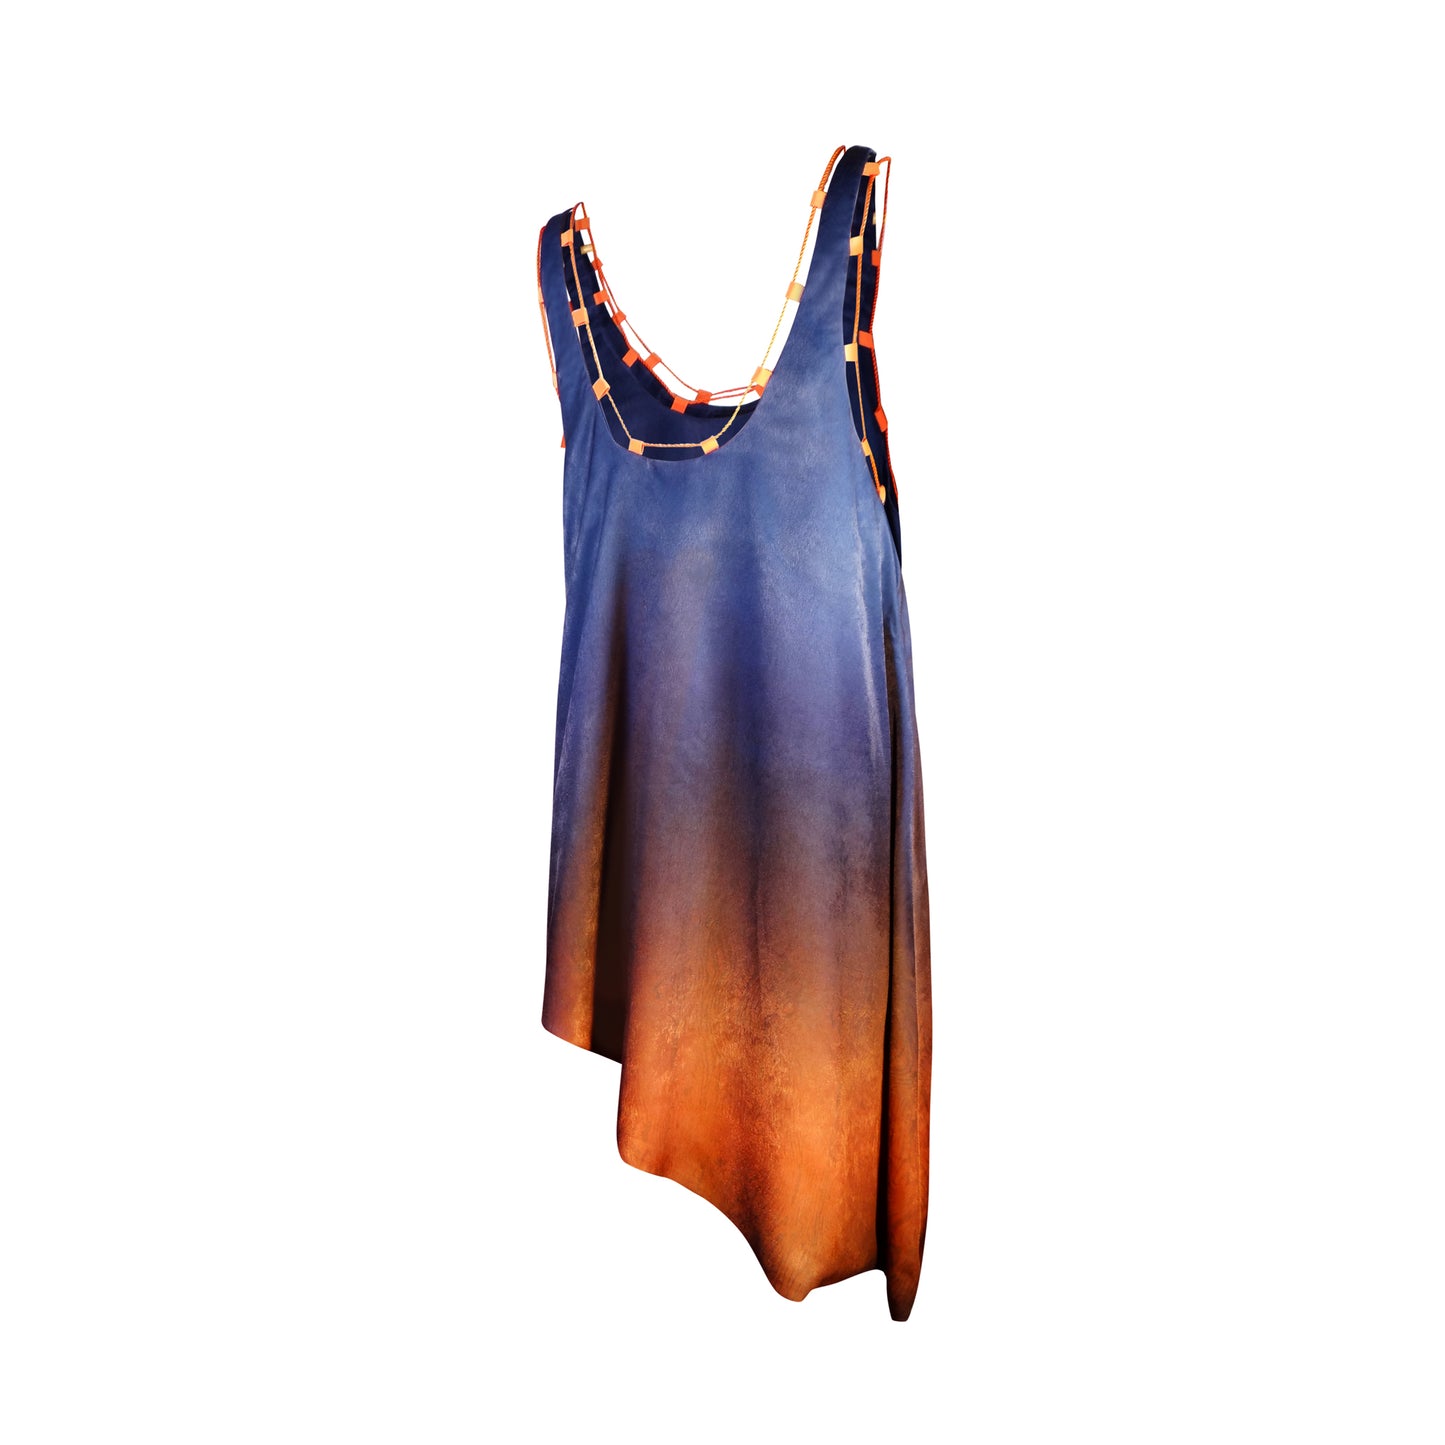 Unisex-fit Asymmetrical Flared Tank Top - LLESSUR NYC